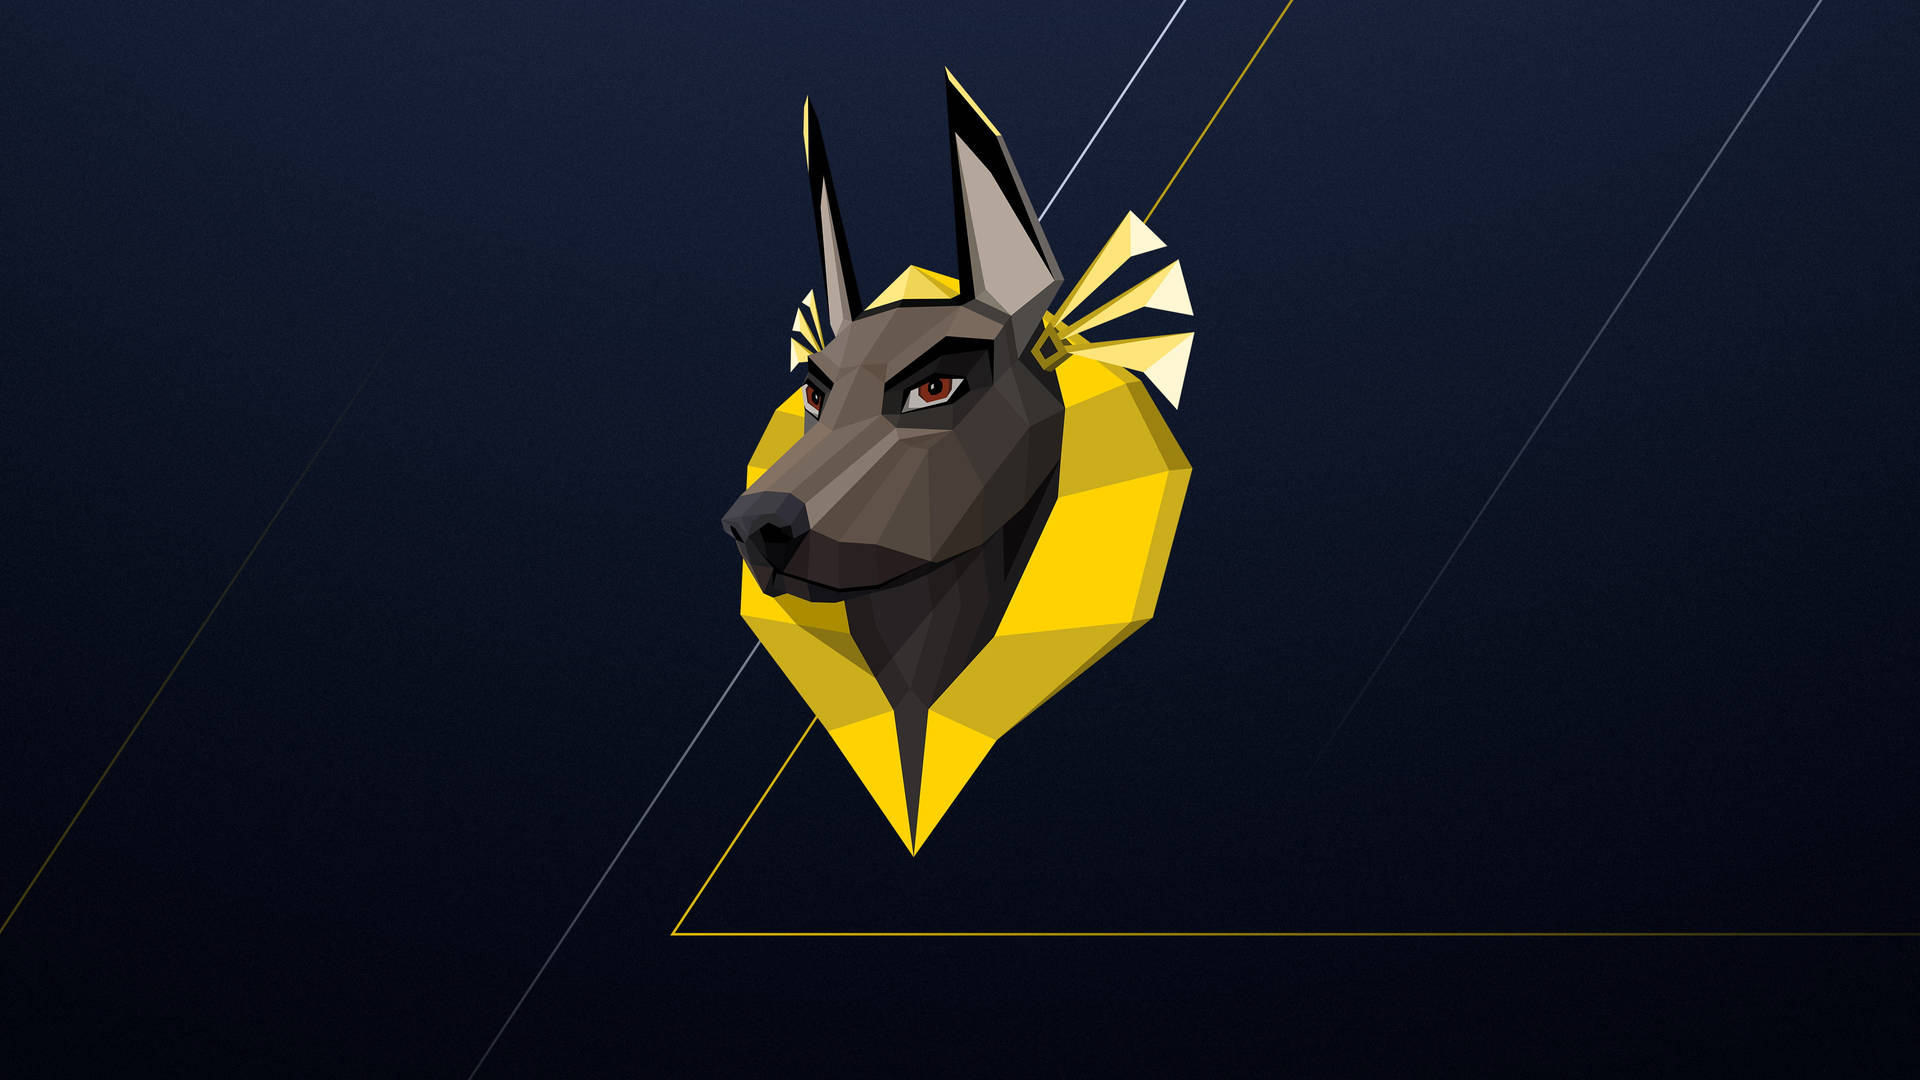 Majestic 4k Imagery Of Anubis, The Ancient Egyptian God With The Head Of A Jackal. Background